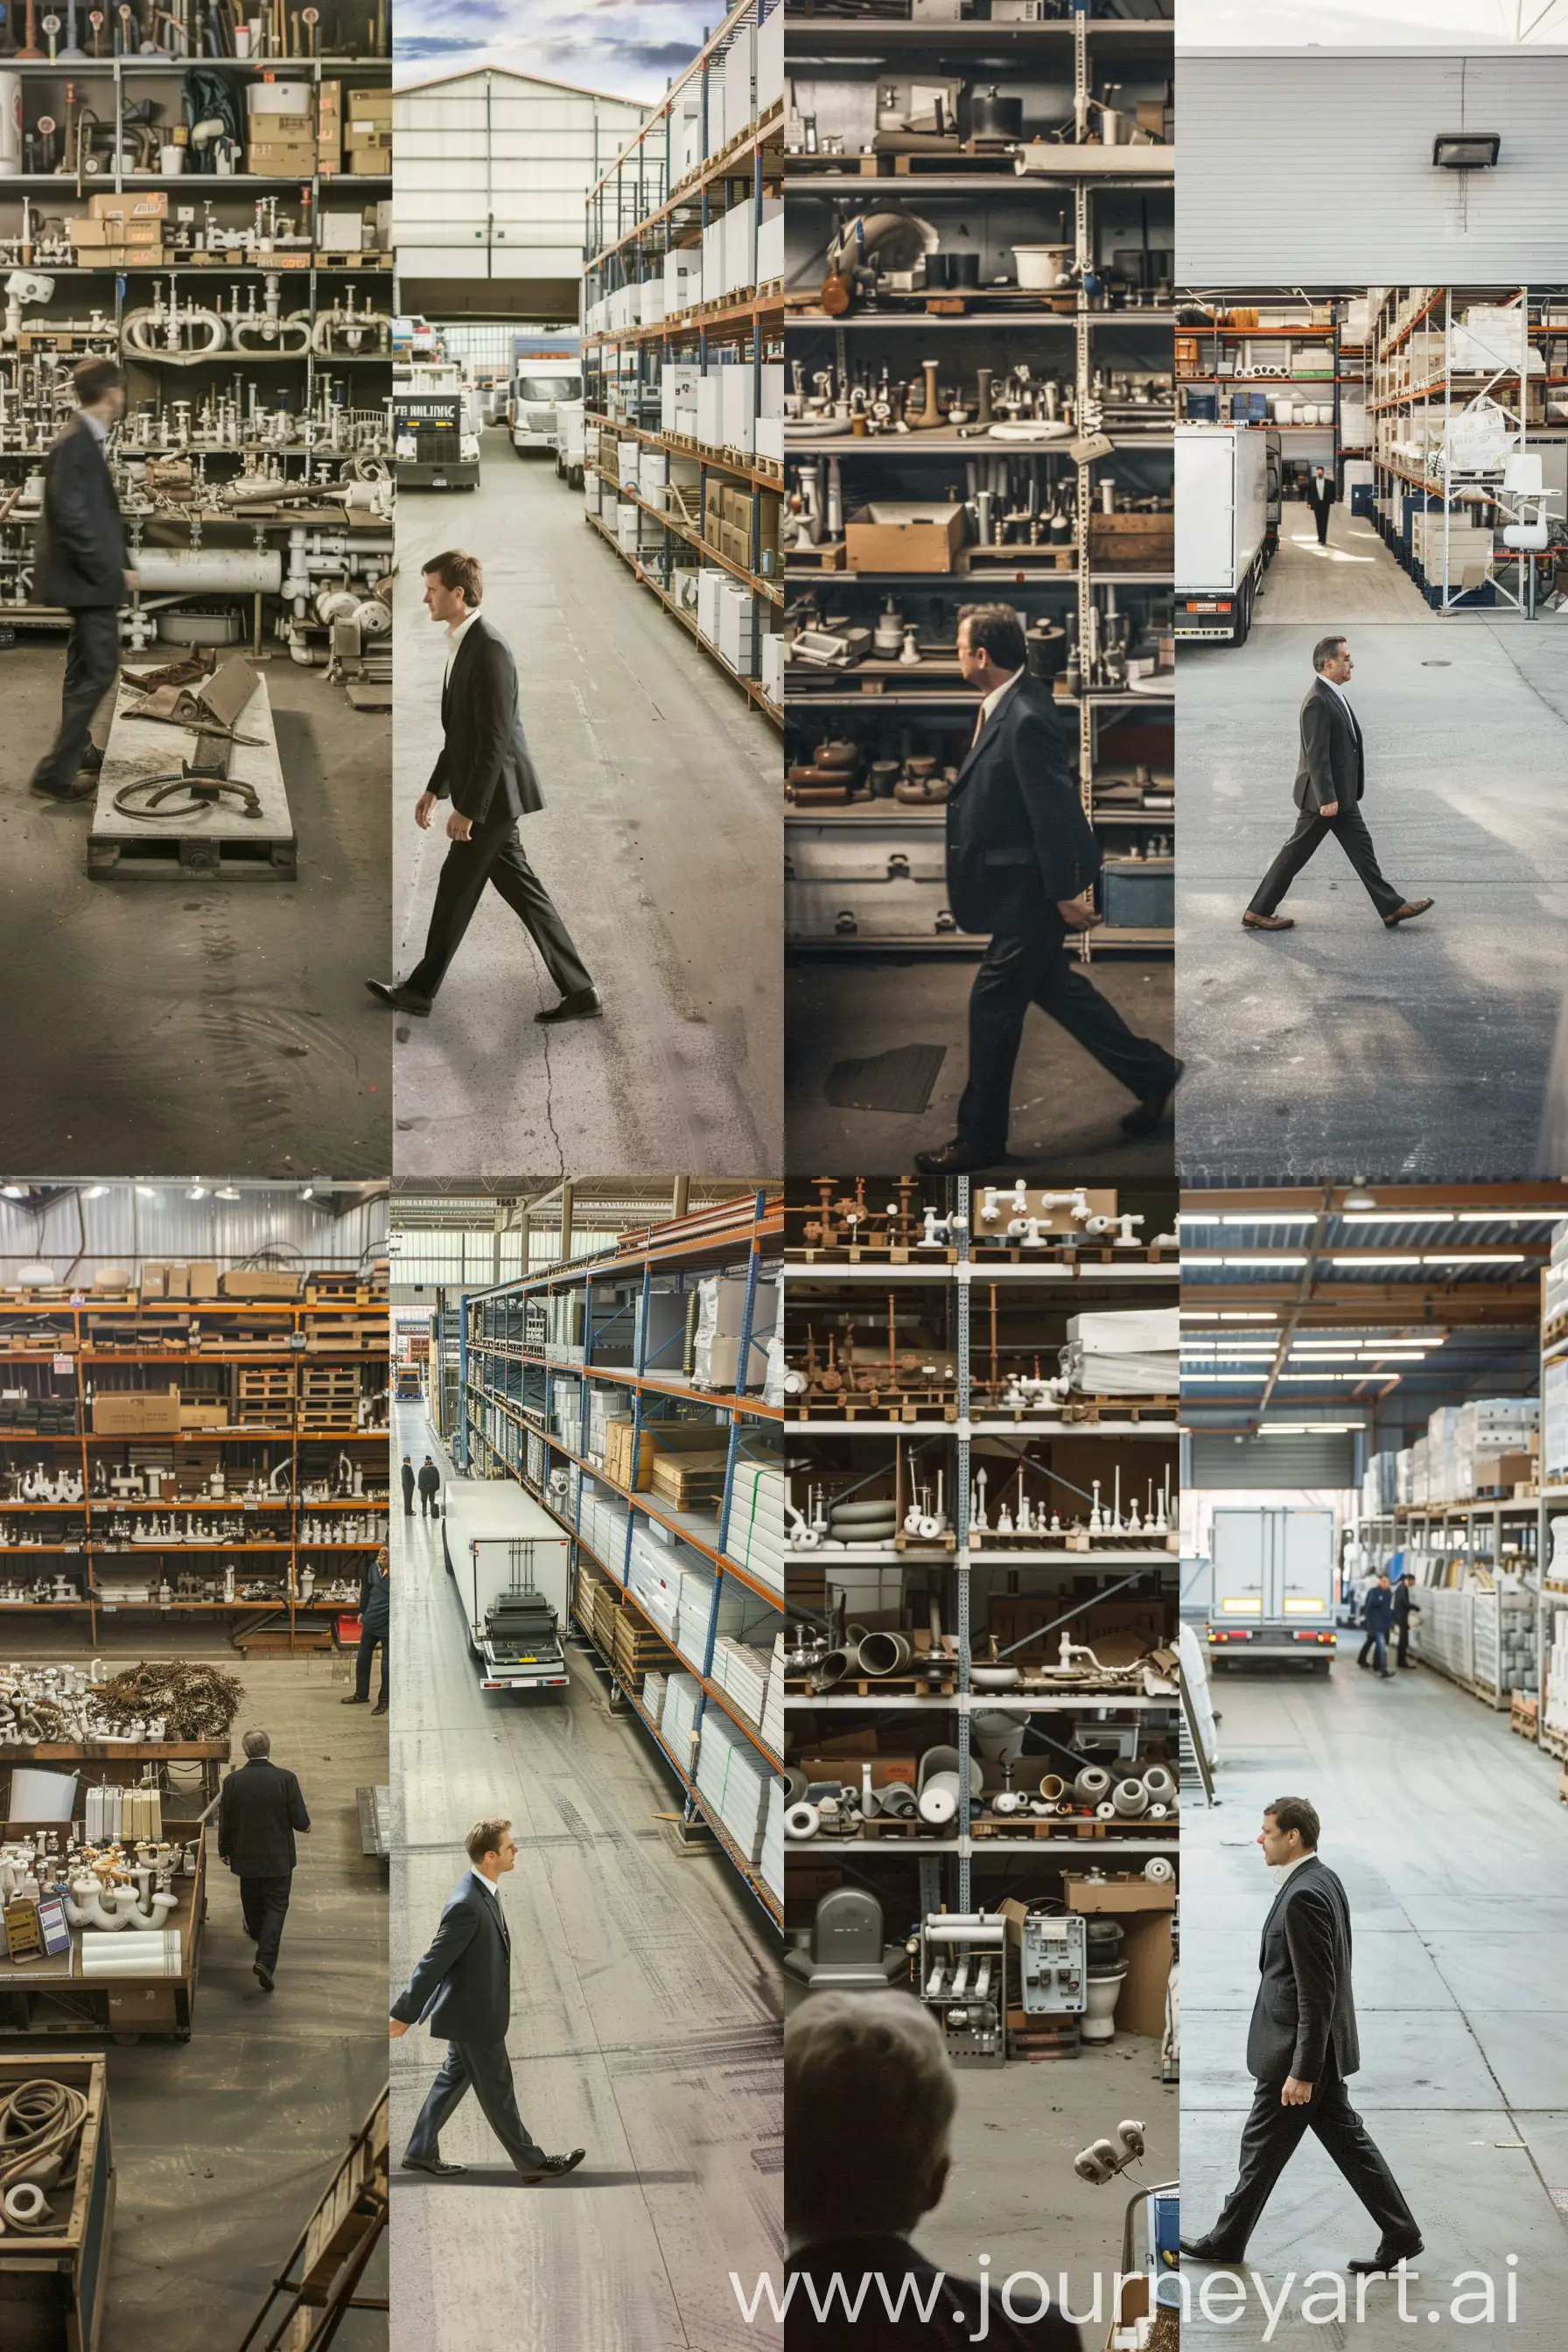 The image is divided into two parts vertically. A man in a suit is walking from left to right, crossing this border. On the left, a flea market is shown where sellers are selling old plumbing. On the right is a warehouse with a view from inside the building, an automated new white plumbing warehouse inside, surrounded by shelves, where all the new plumbing goods are neatly arranged, the floor is clean, and a truck is unloading to the warehouse where employees are carrying boxes --ar 4:6 --v 6